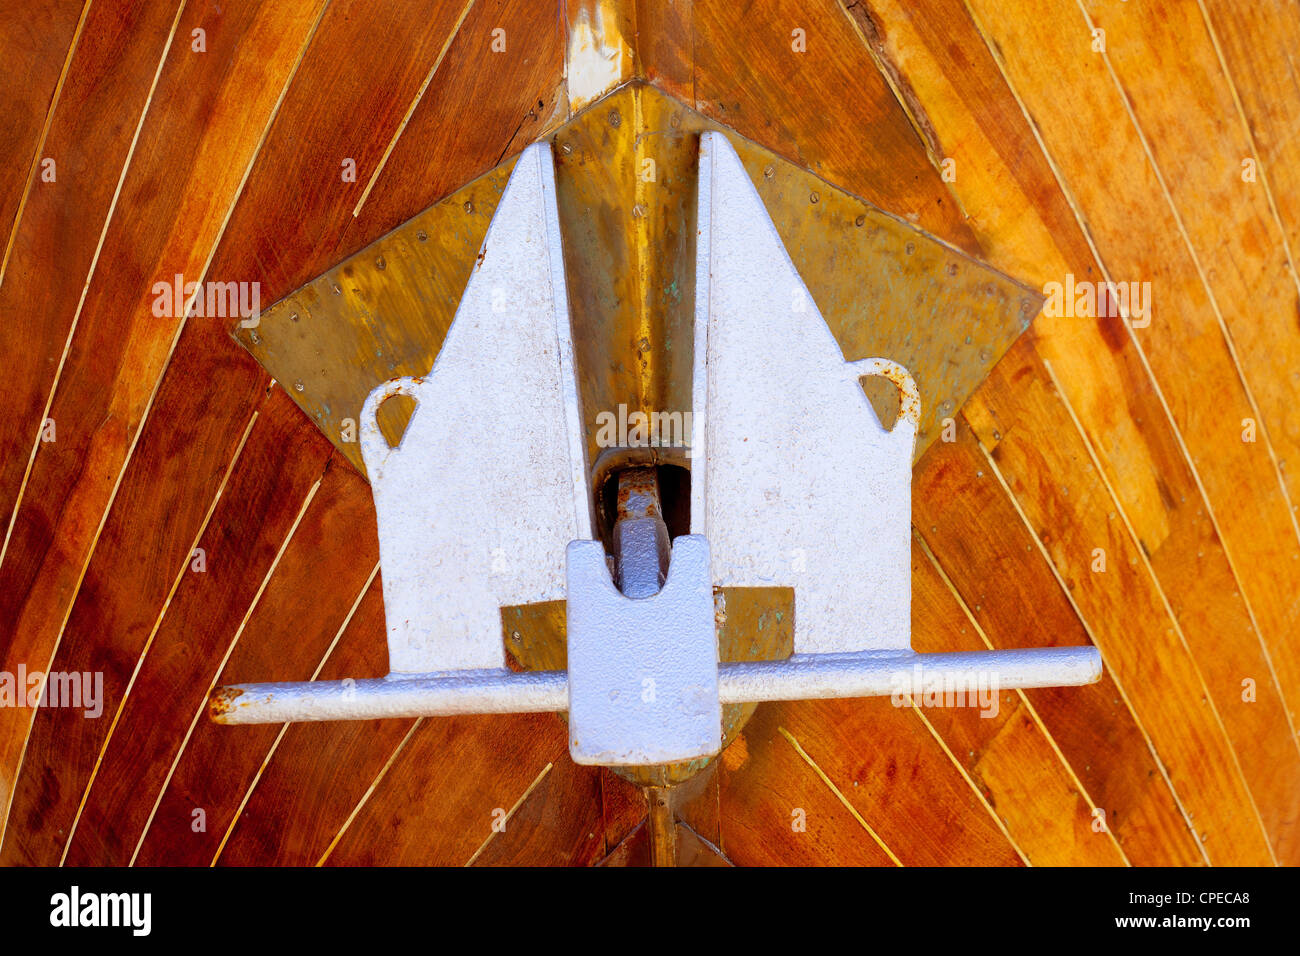 anchor detail in silver color on a wooden hull boat Stock Photo